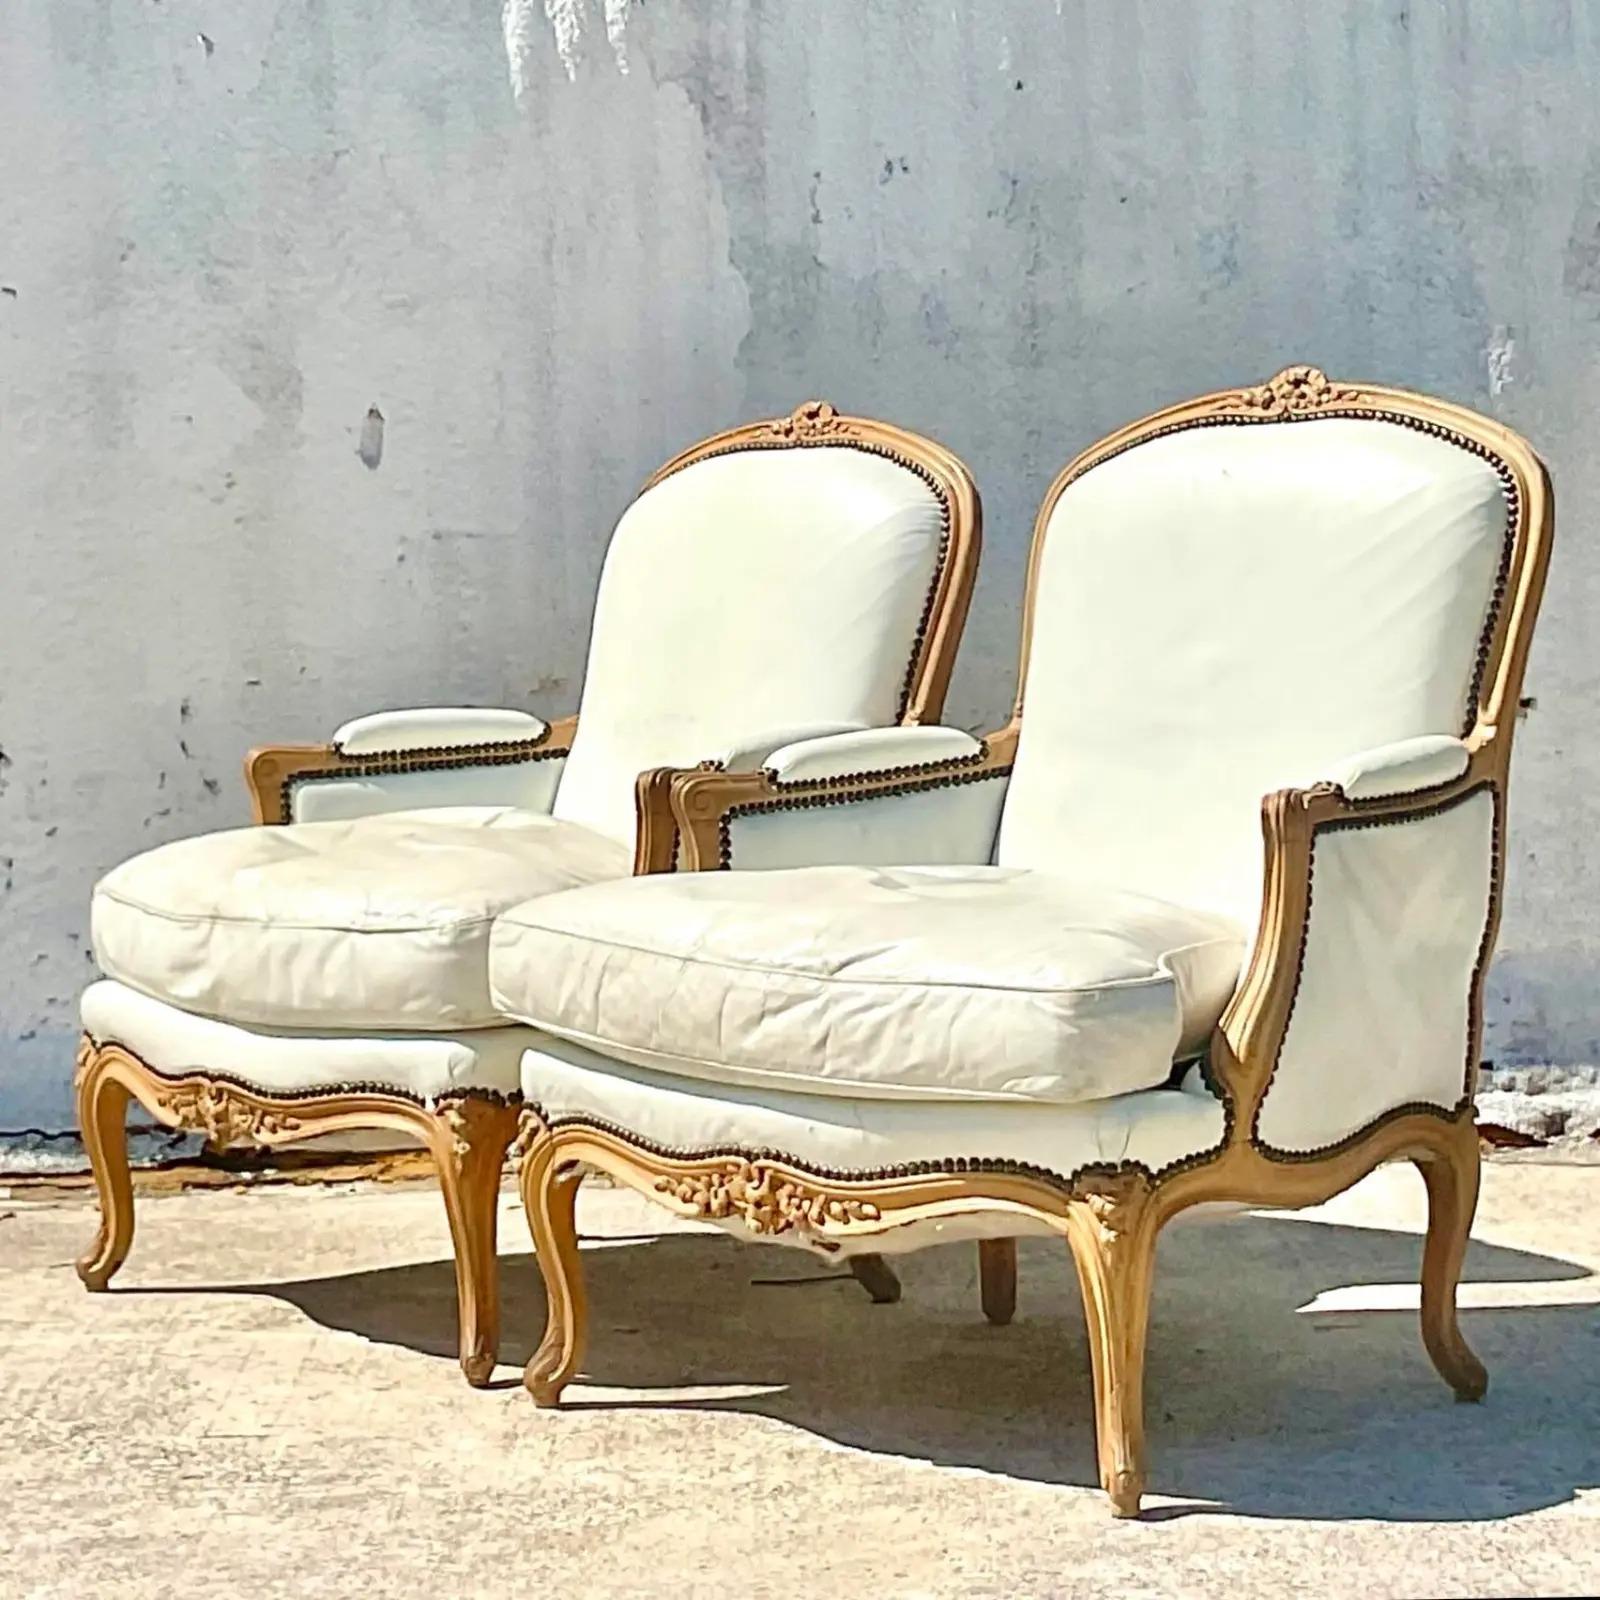 Vintage Boho John Dickinson White Leather Bergere Chairs - a Pair In Good Condition For Sale In west palm beach, FL